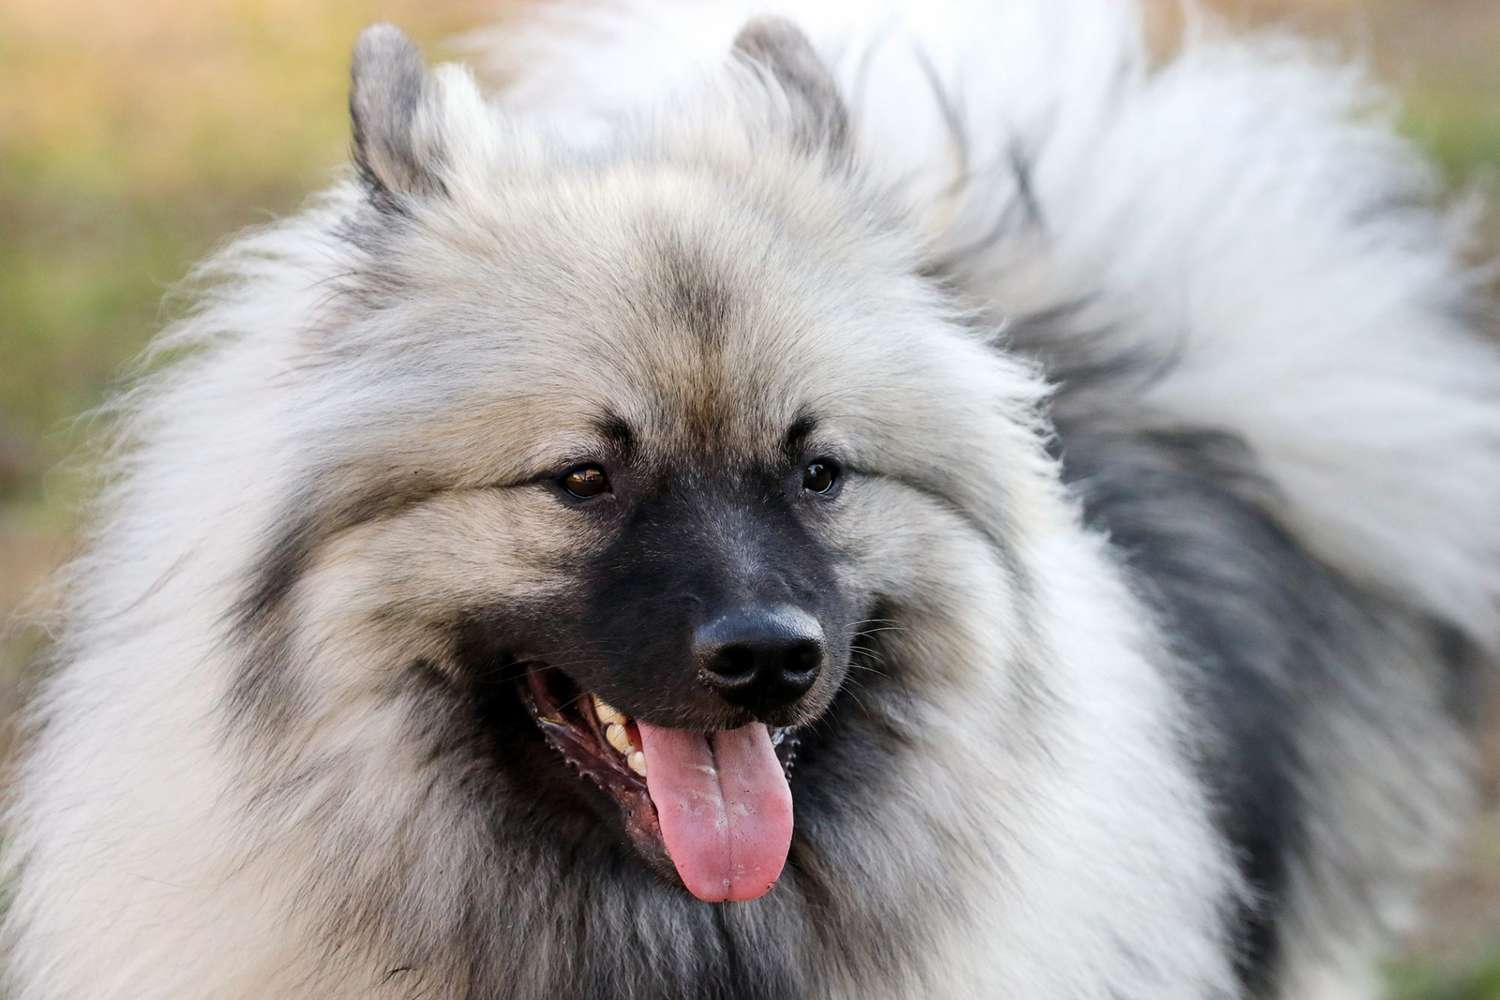 Fluffy Keeshond dog smiles off to the side with tongue out